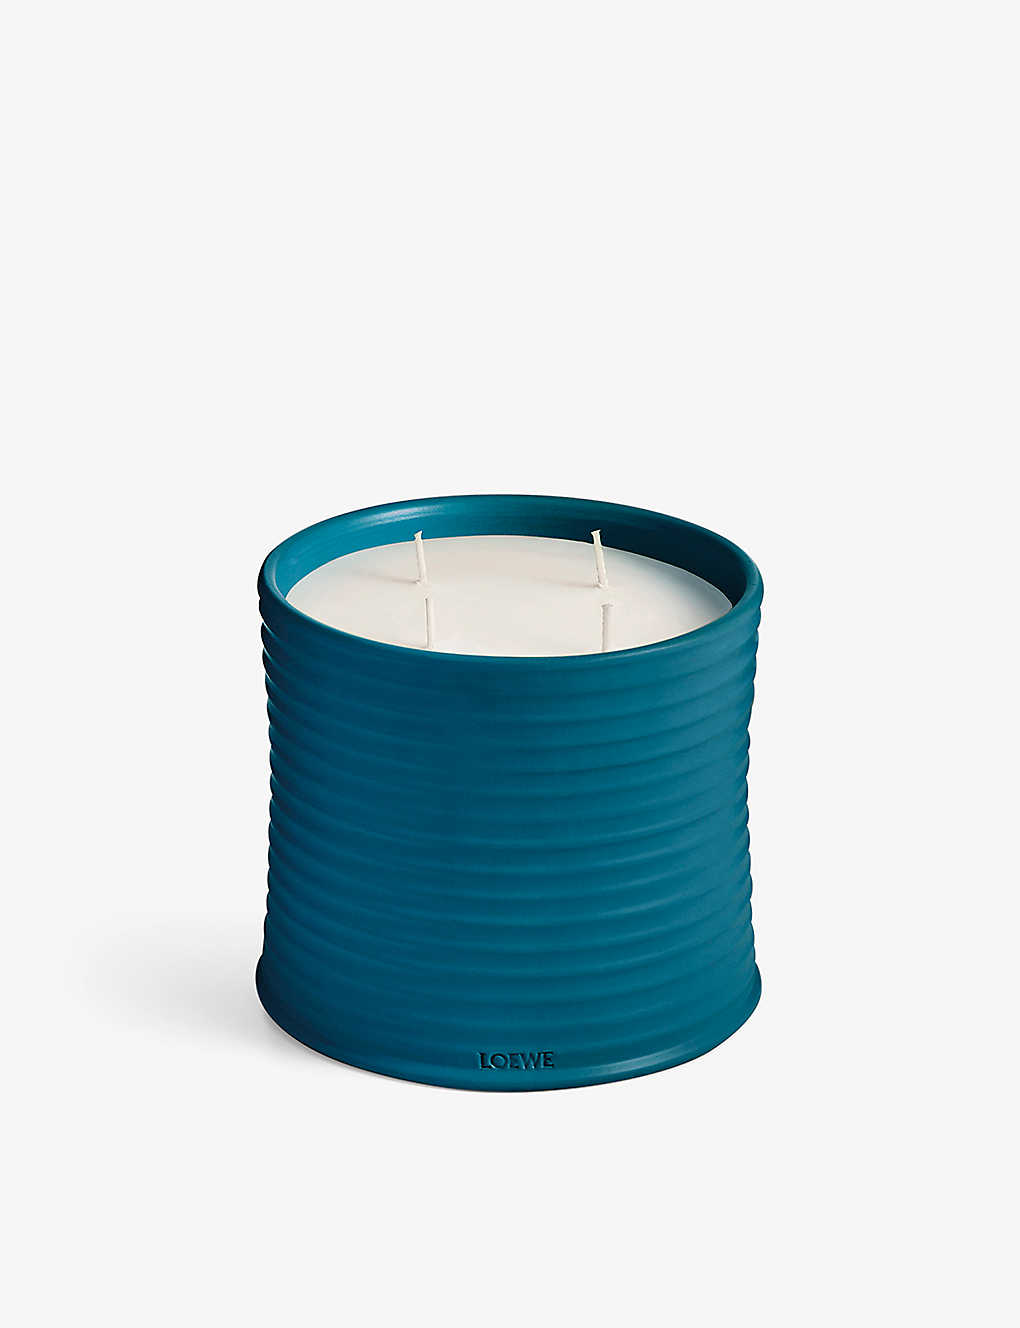 Loewe Incense Scented Candle 2.1kg In Blue